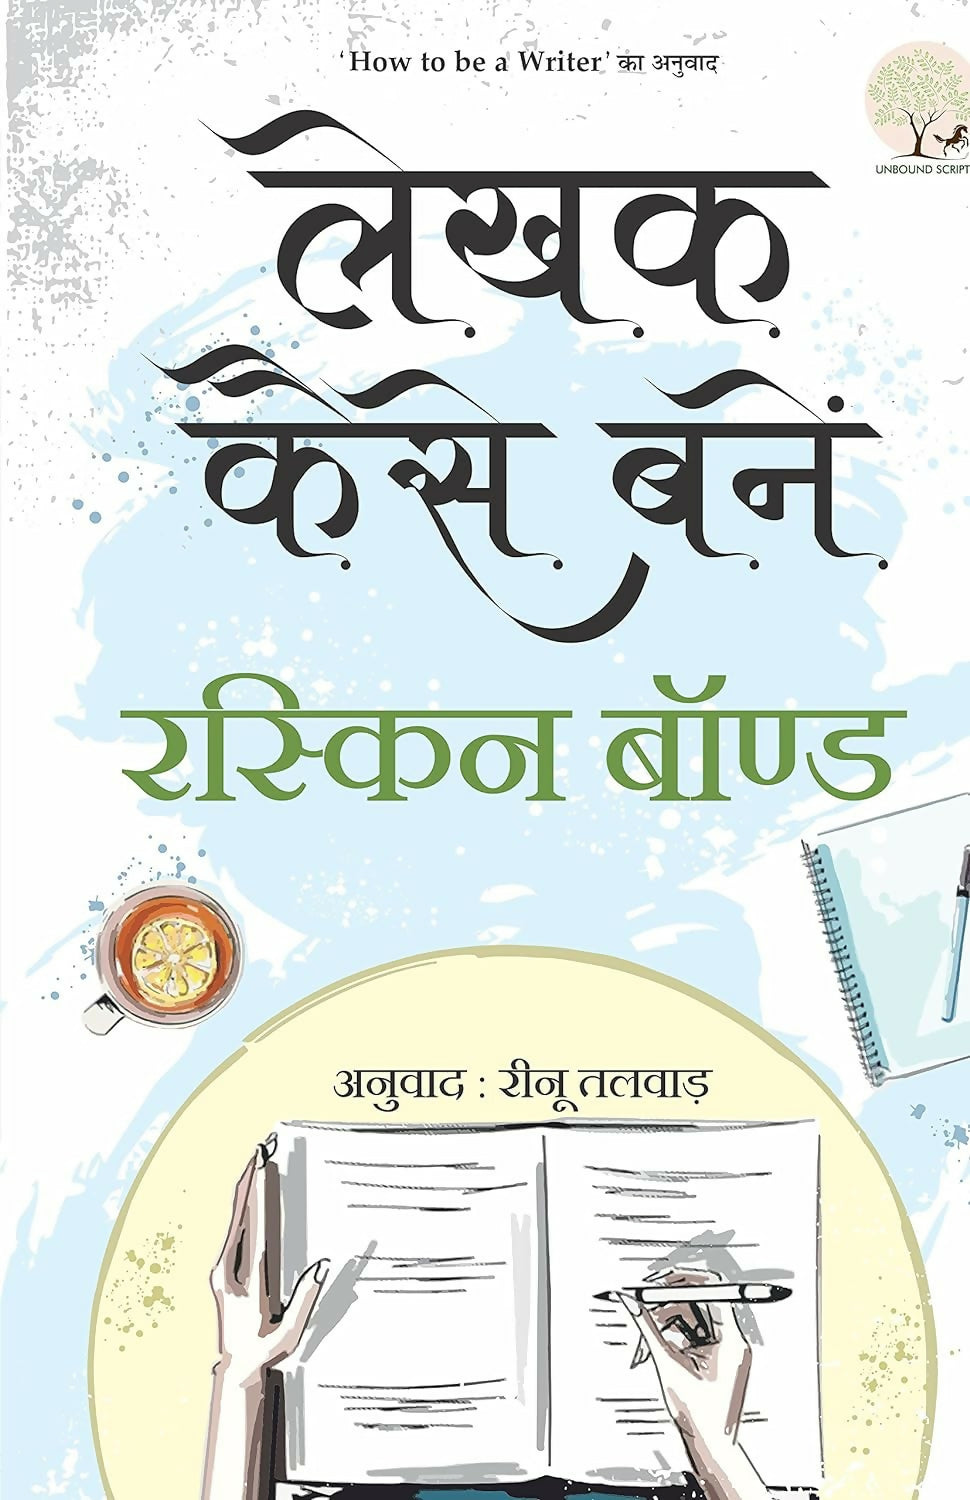 Lekhak Kaise Banein ( How to be a Writer ) By Ruskin Bond